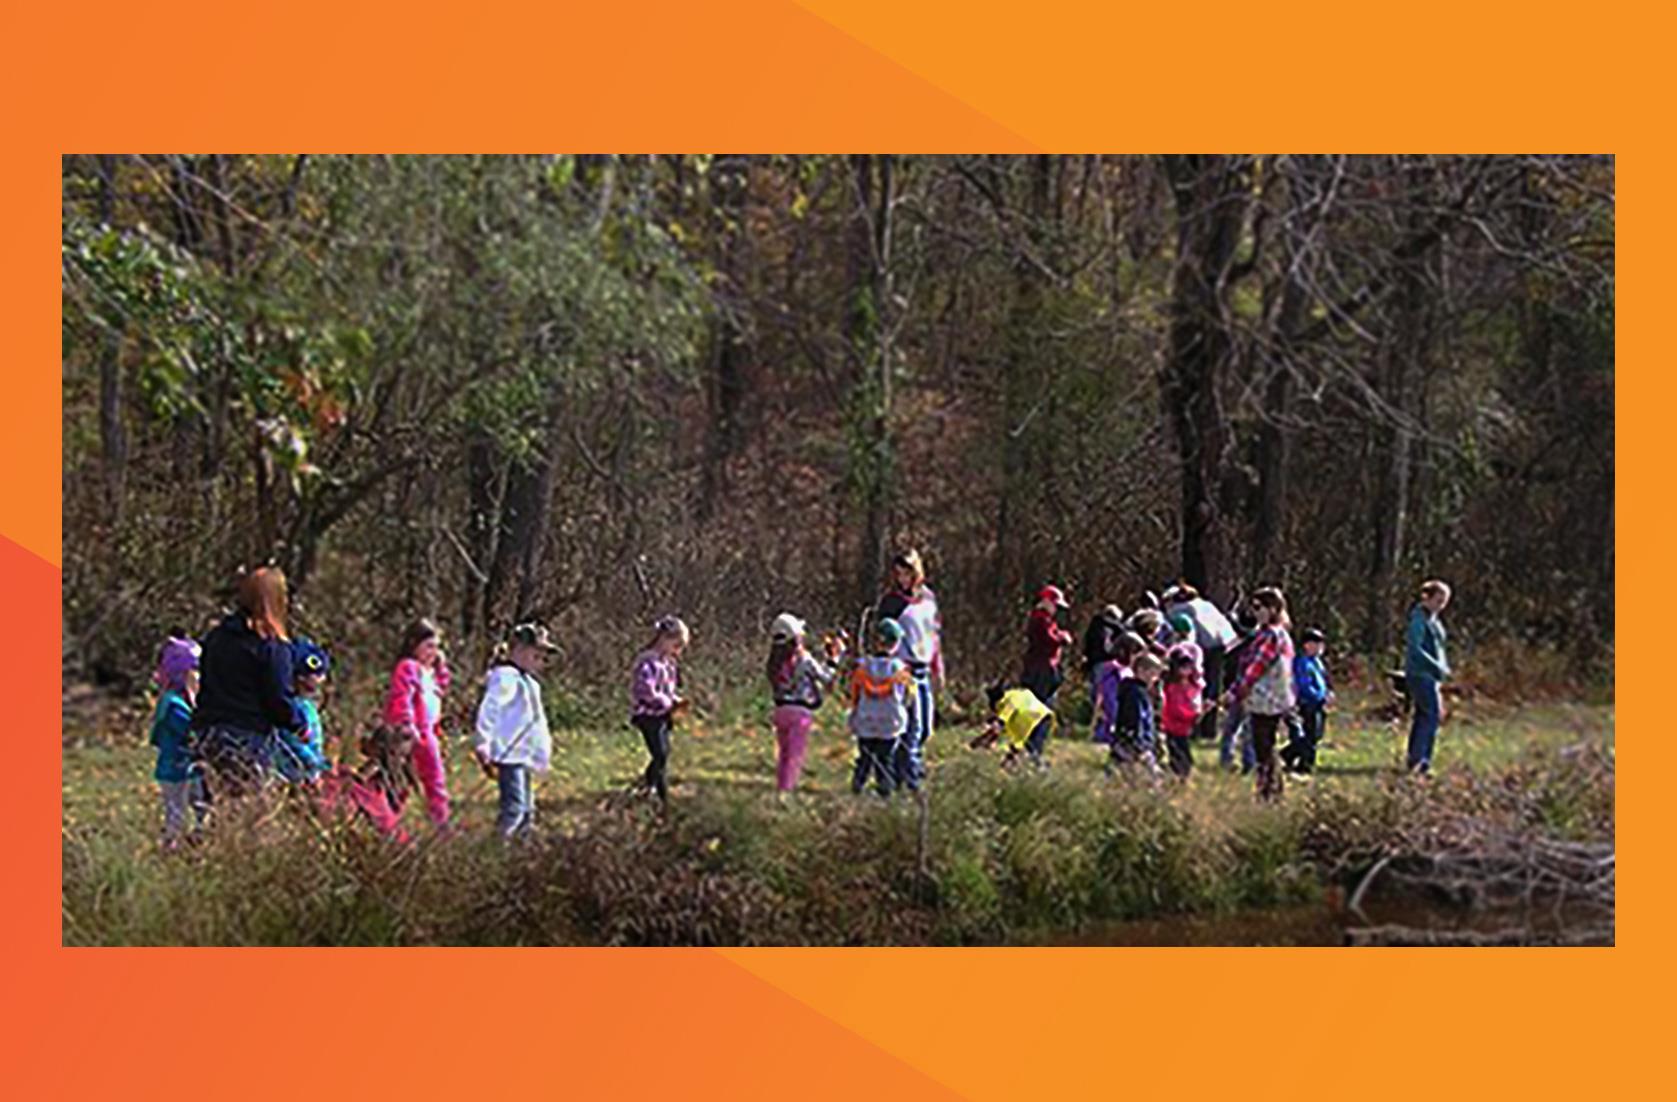 Chemours Washington Works team took 65 first graders to a local nature trail for a day of exploration and education